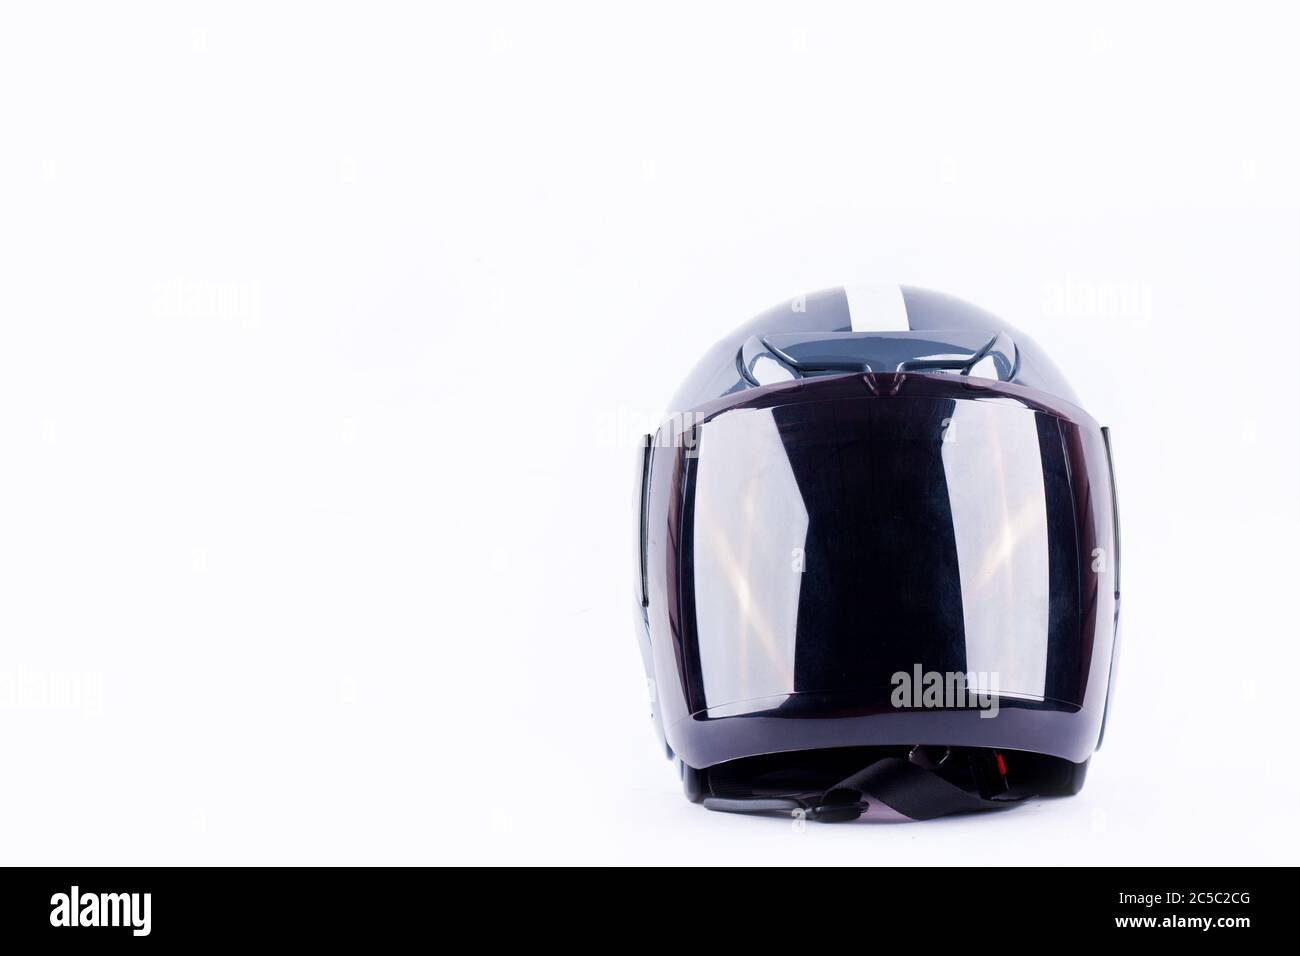 motorcycle helmet on white background helmet safety object isolated Stock Photo